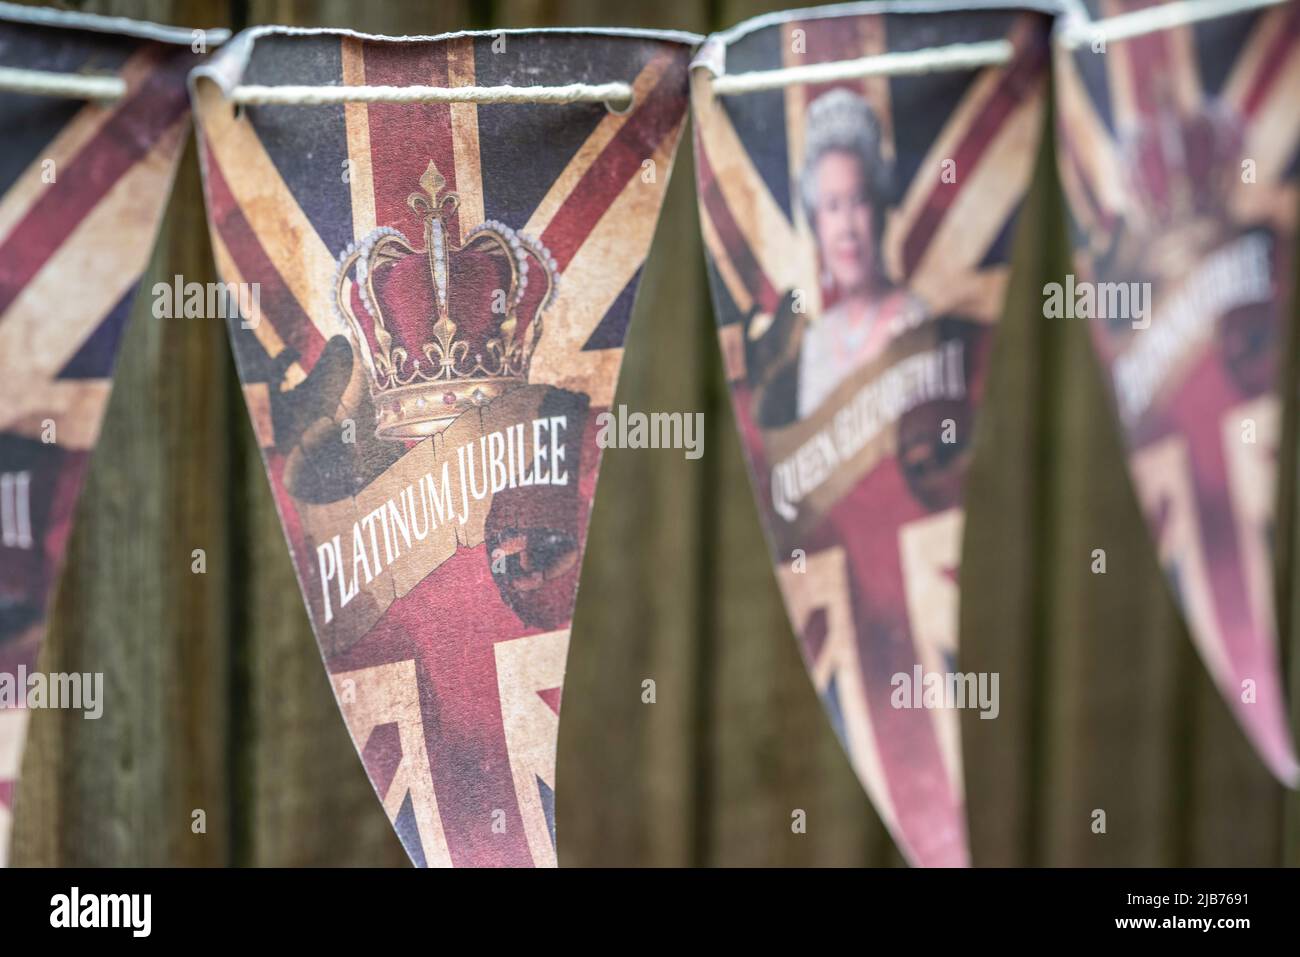 Platinum Jubilee bunting along a fence to celebrate Queen Elizabeth II's 70 years of reign, England, UK Stock Photo